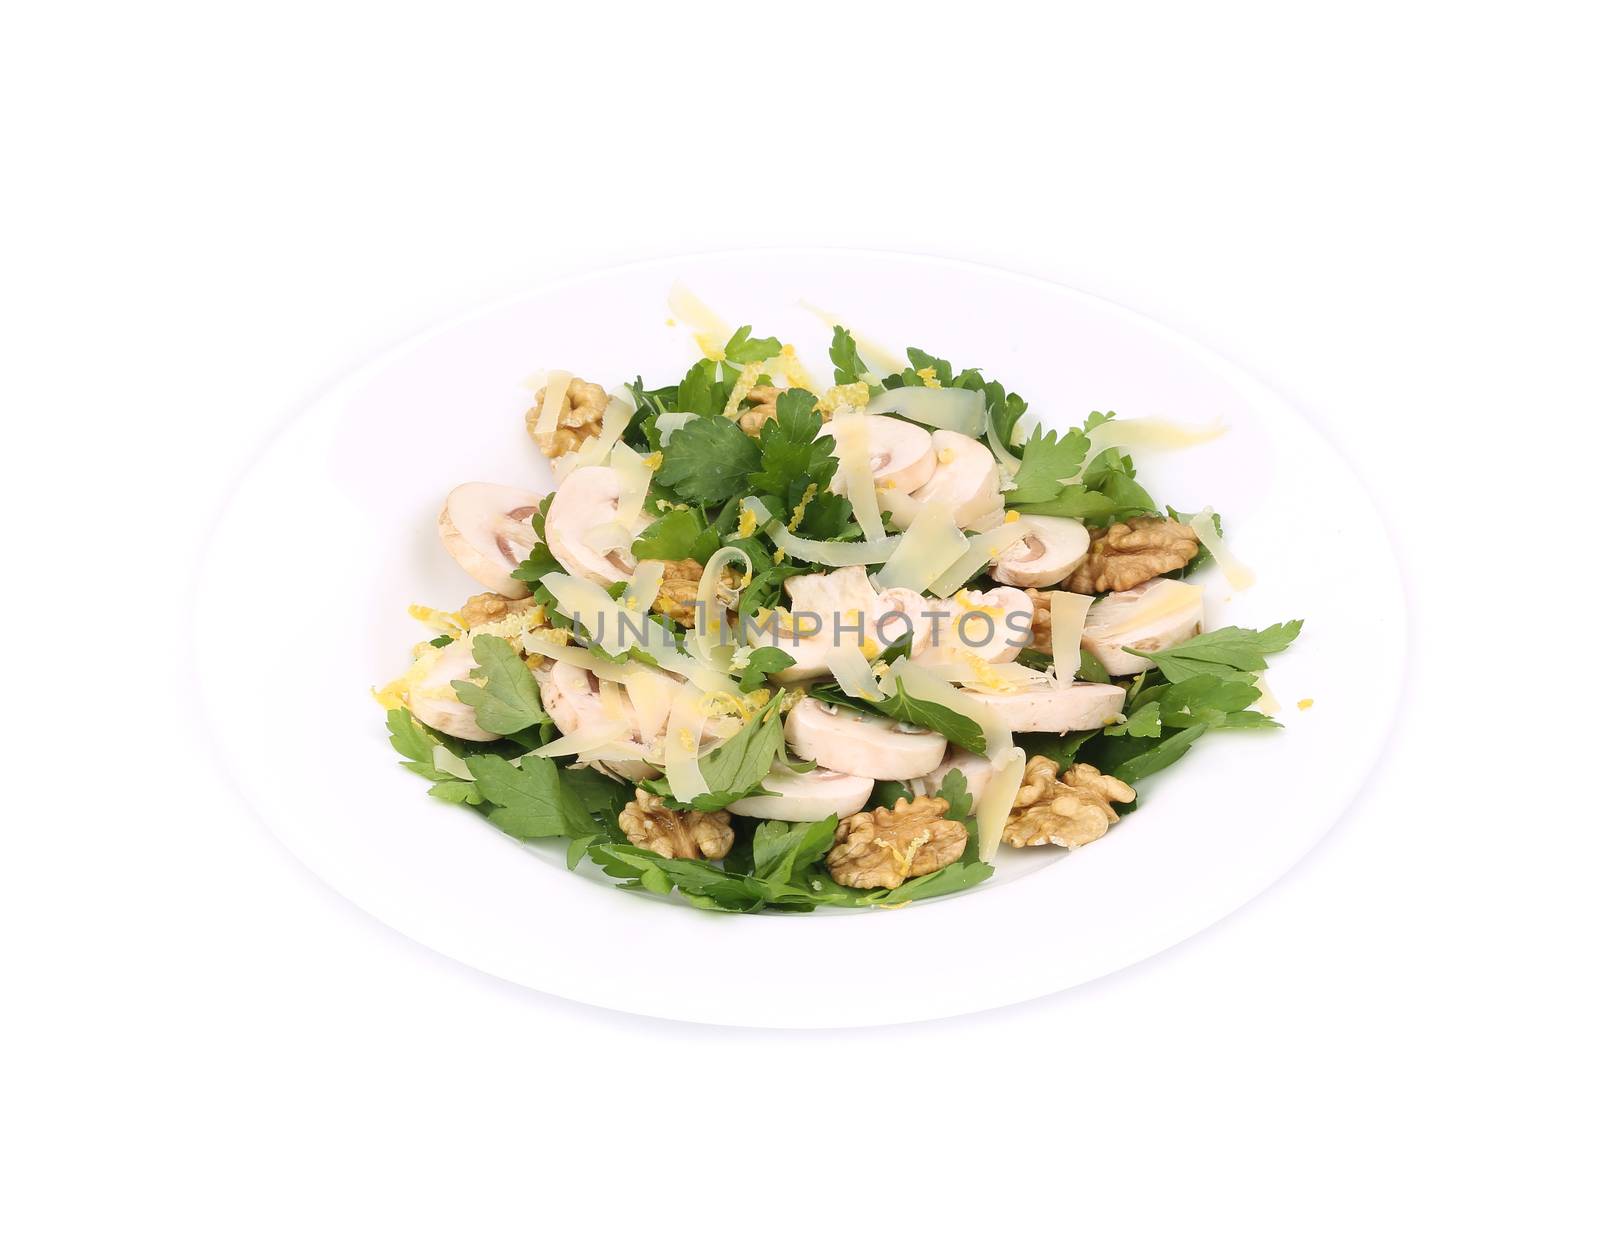 Mushroom salad with walnuts and parsley. Isolated on a white background.